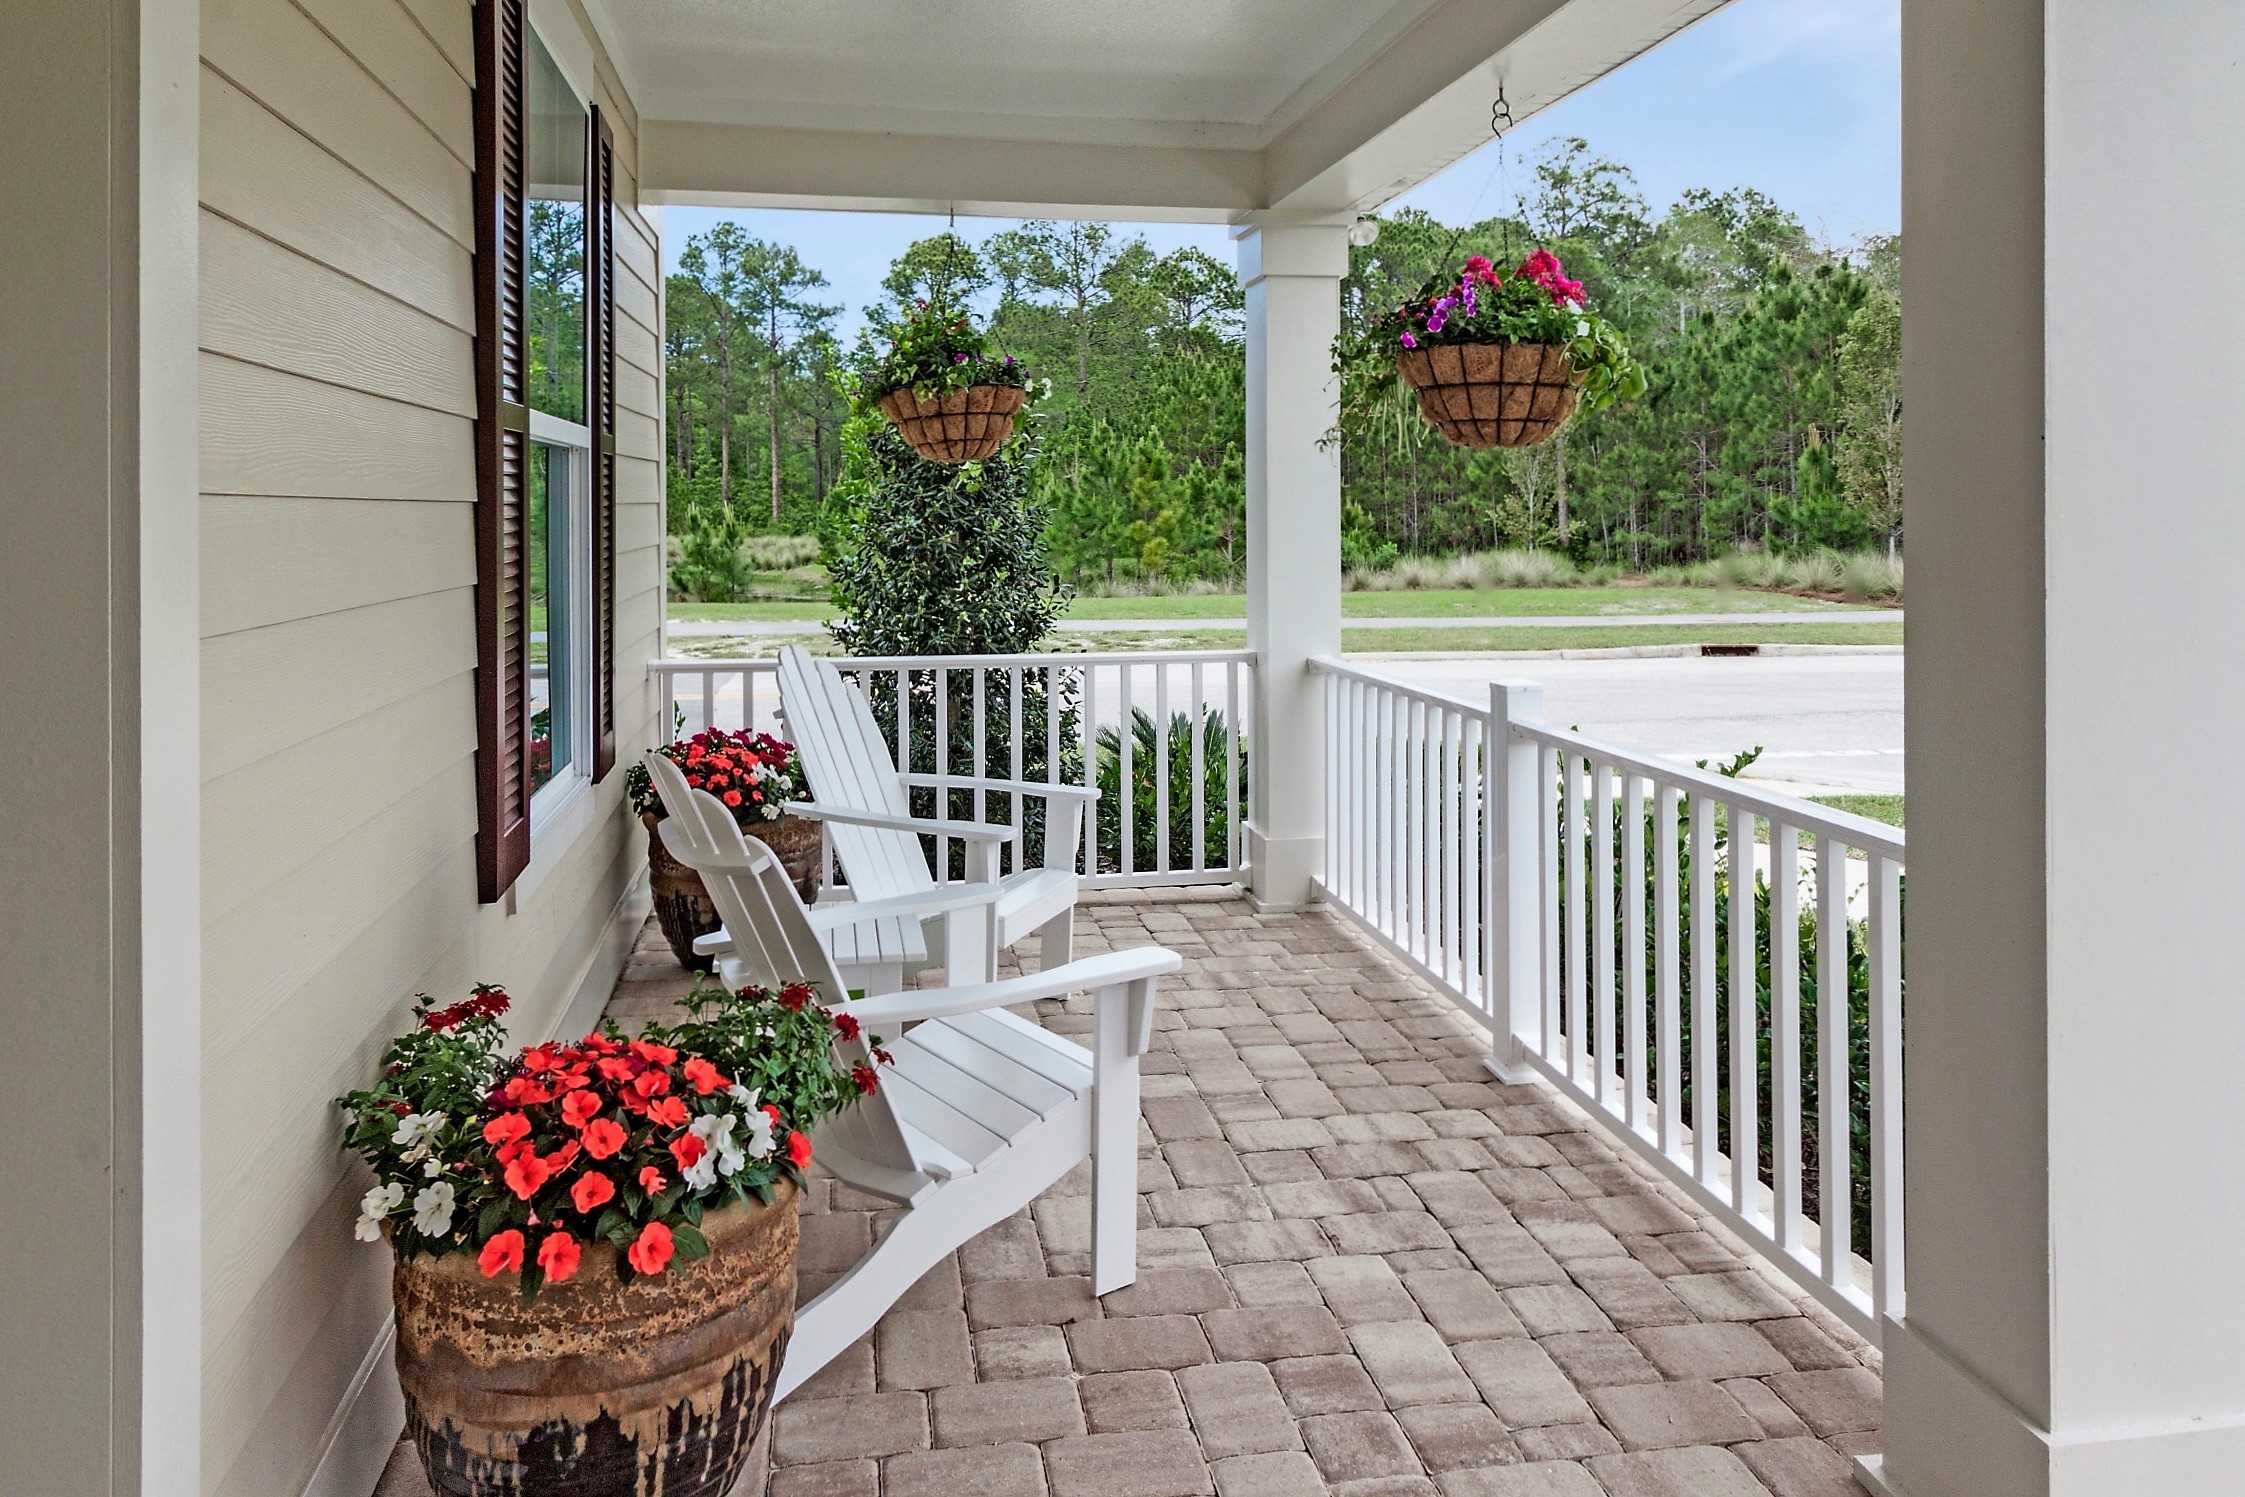 Landon Homes’ front porch style is showcased in TrailMark’s authentic neighborhood streetscape.